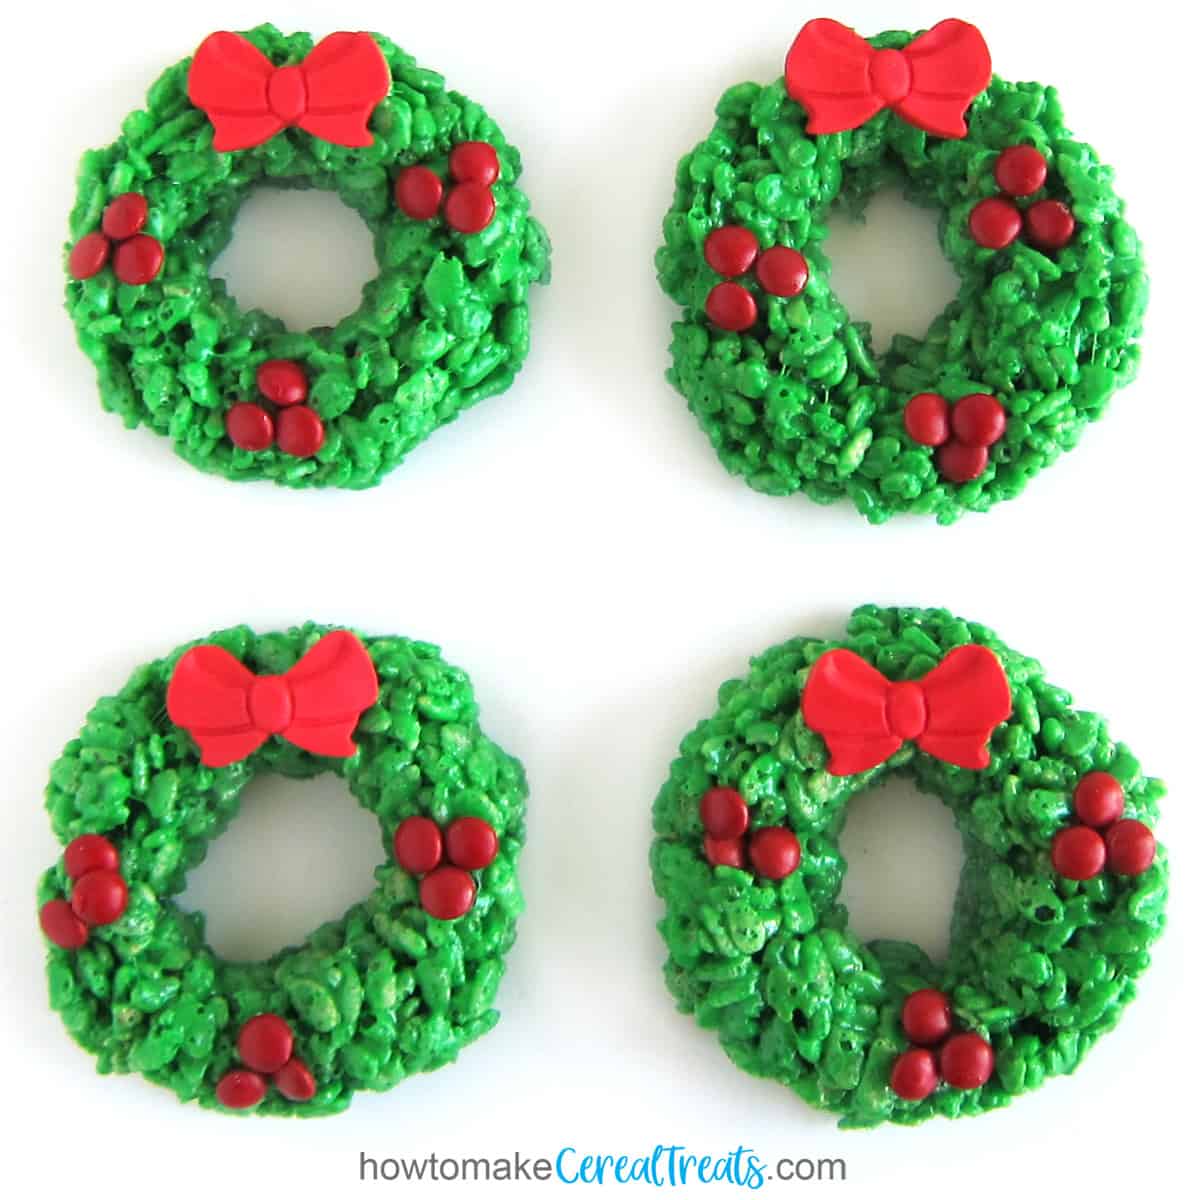 Christmas Rice Krispie Treat Wreaths topped with mini red M&M's and a red modeling chocolate bow.